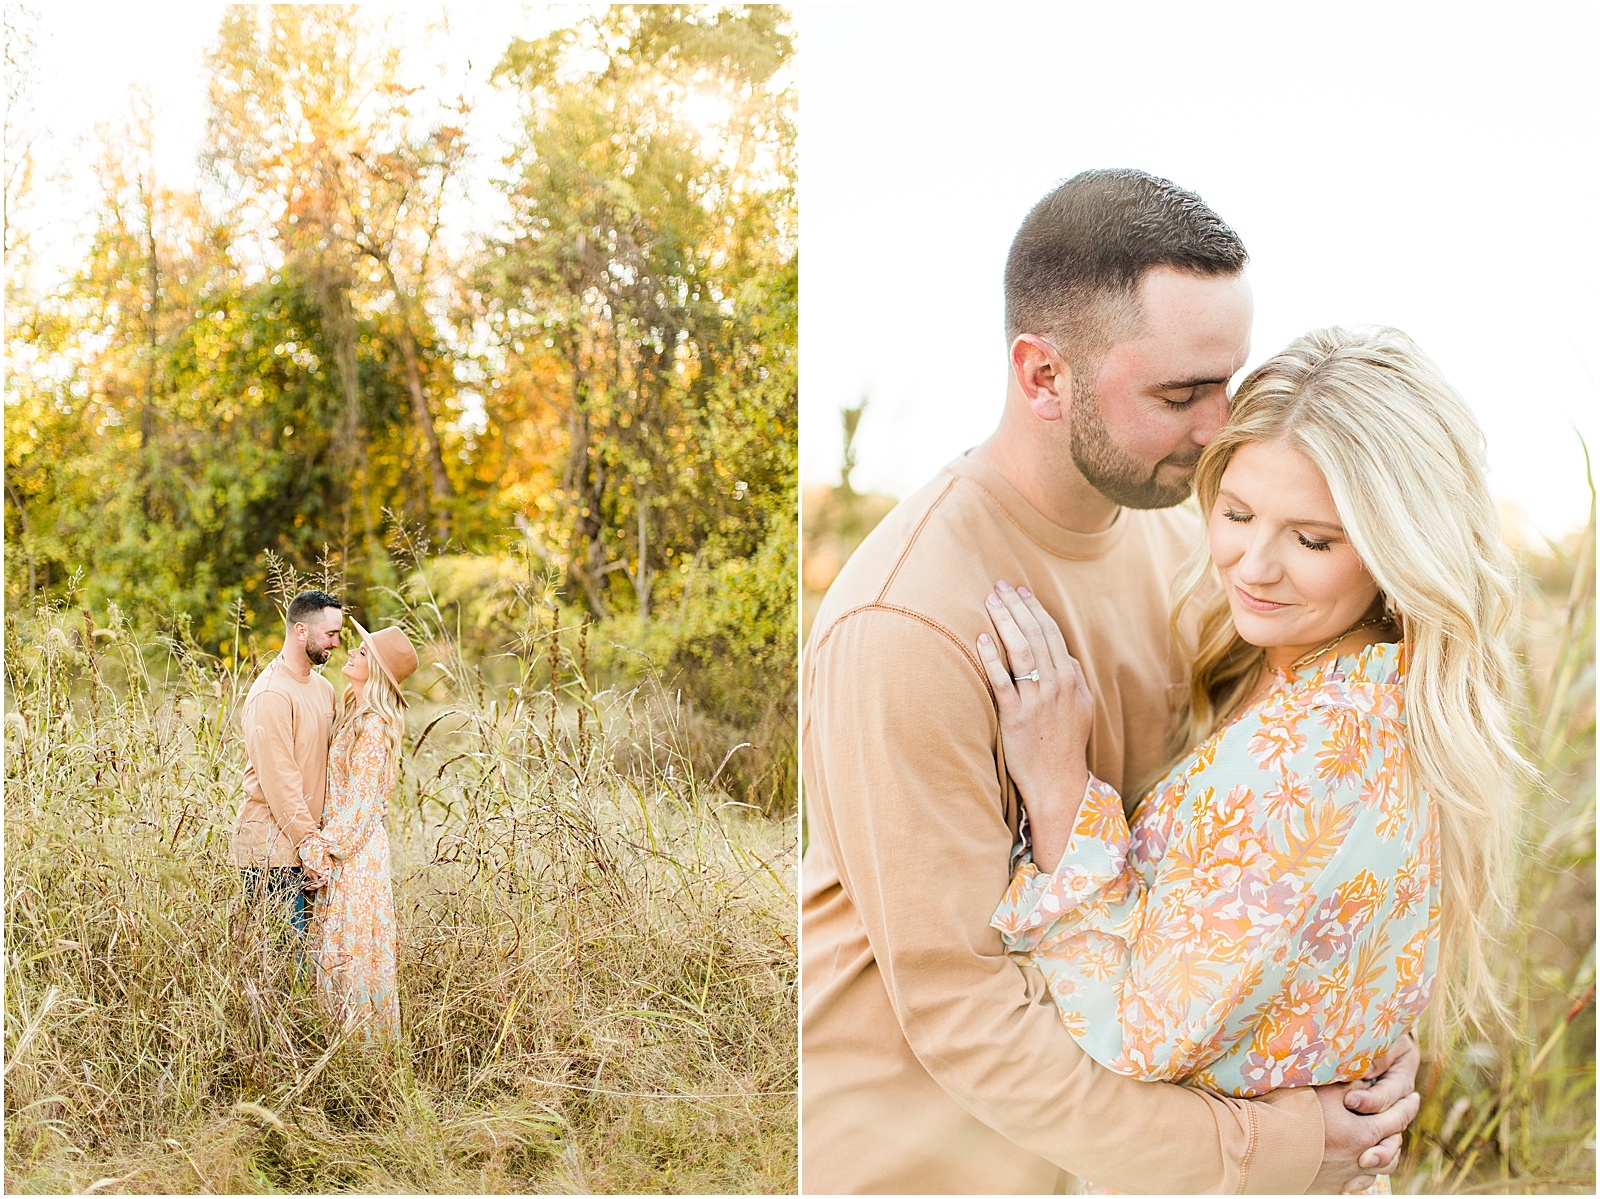 A Southern Indiana Engagement Session | Charleston and Erin | Bret and Brandie Photography018.jpg